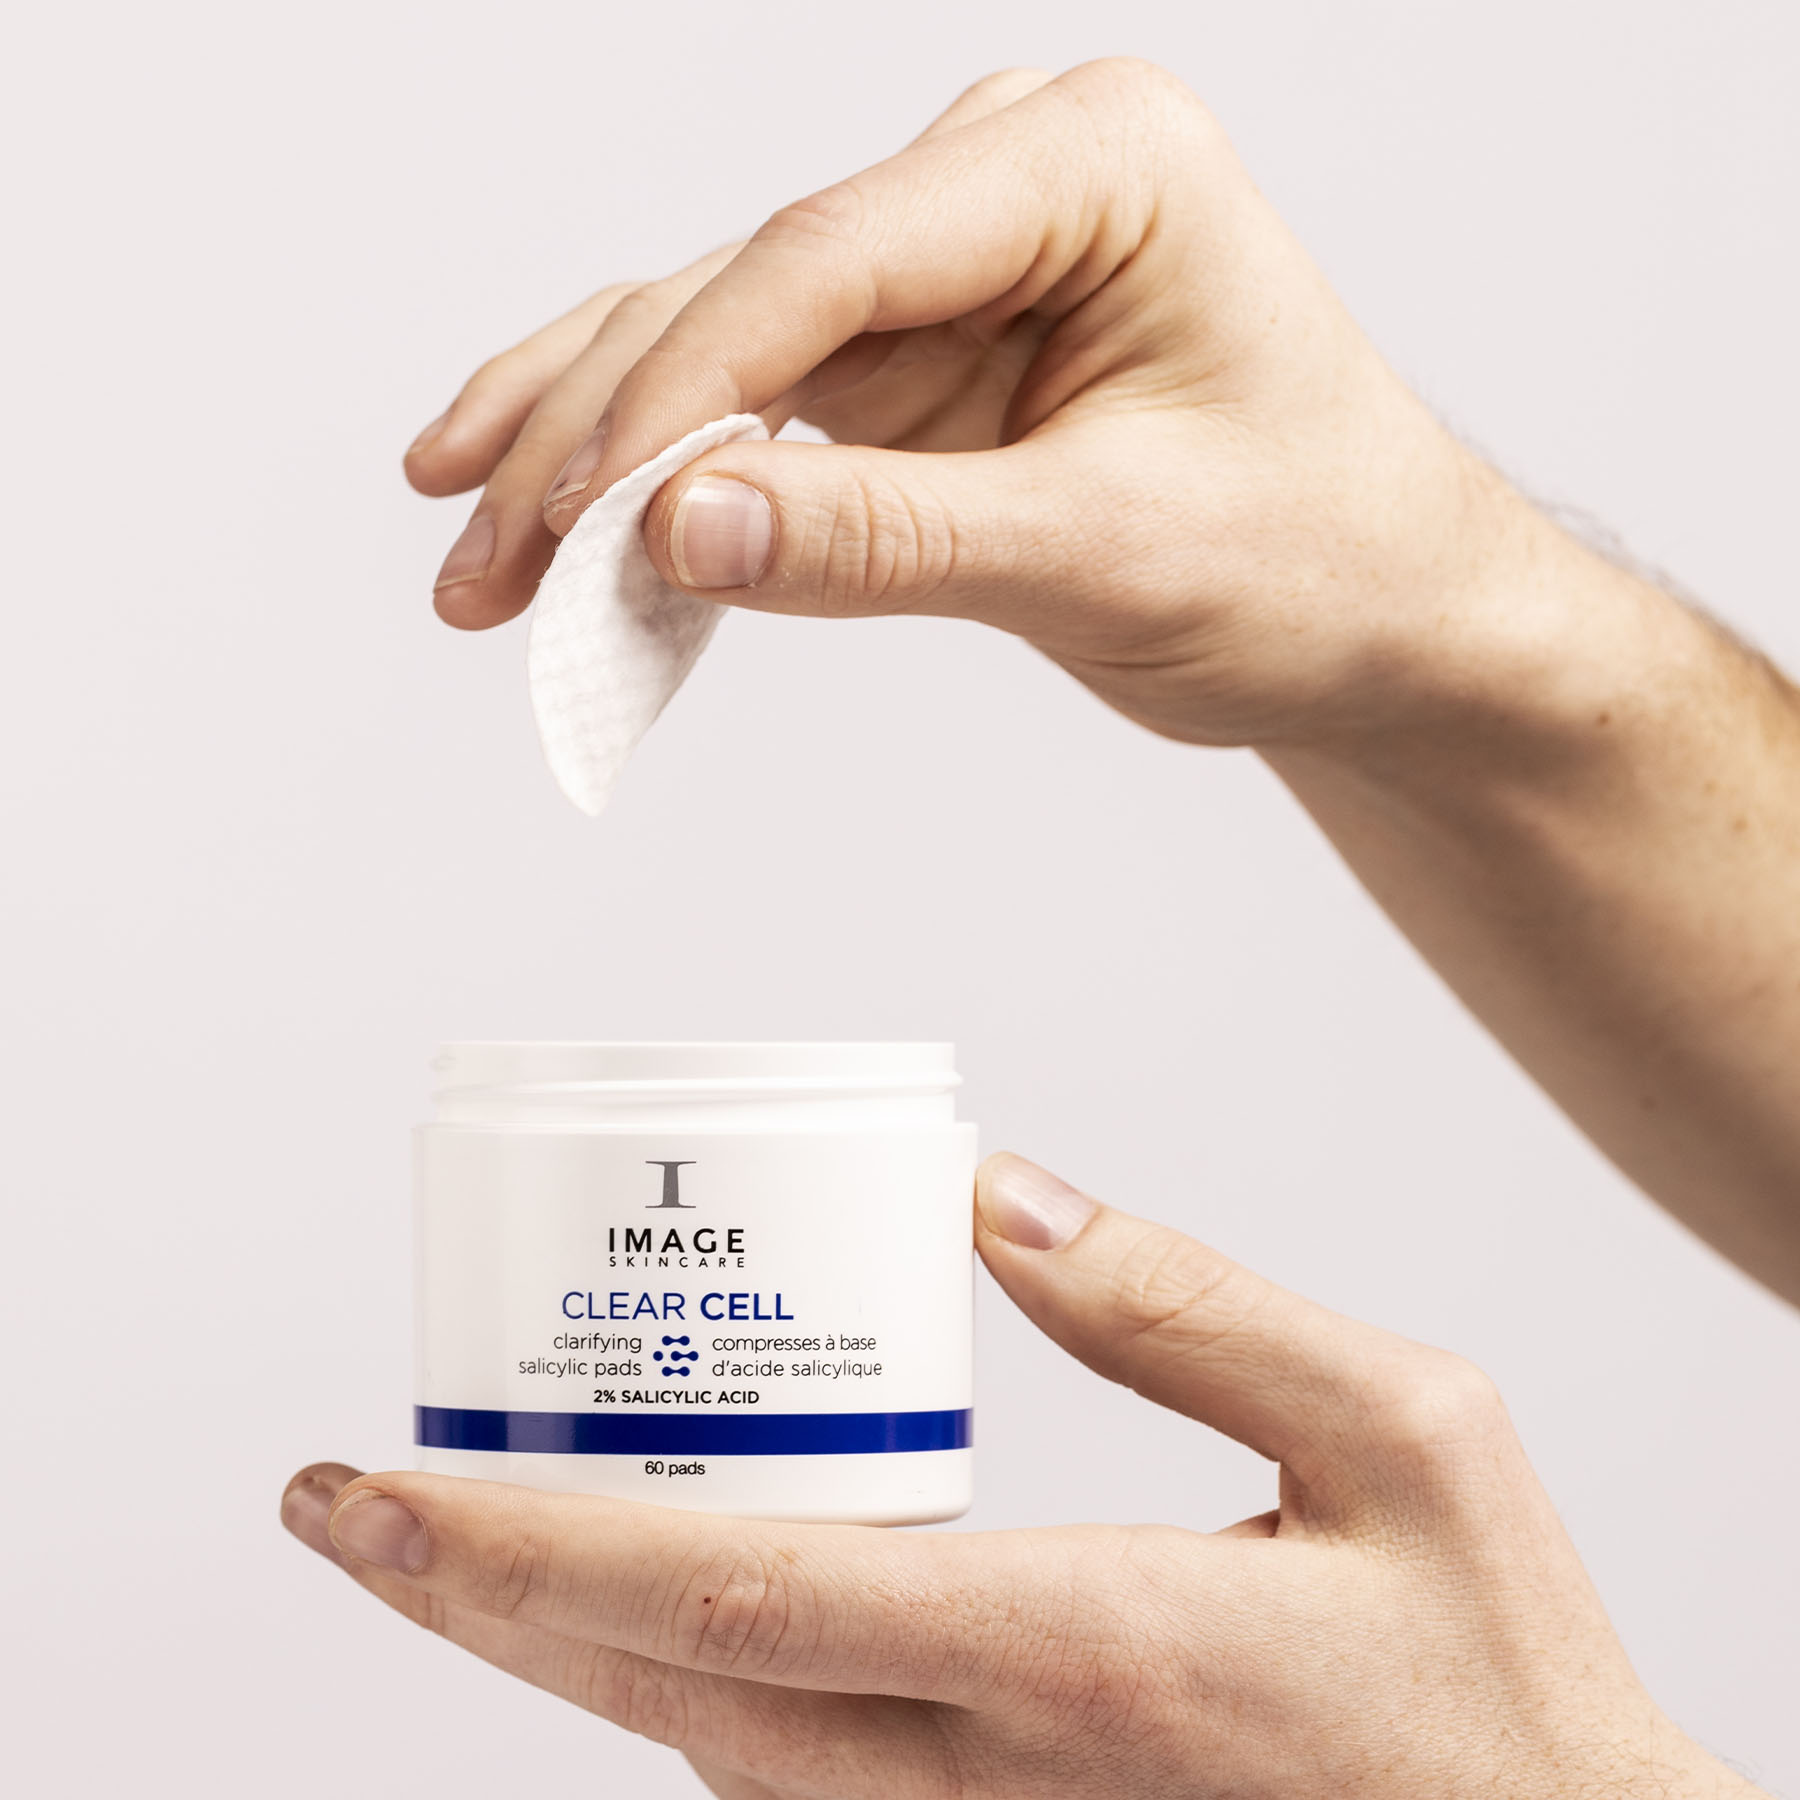 Clear Cell – Clarifying salicylic pads